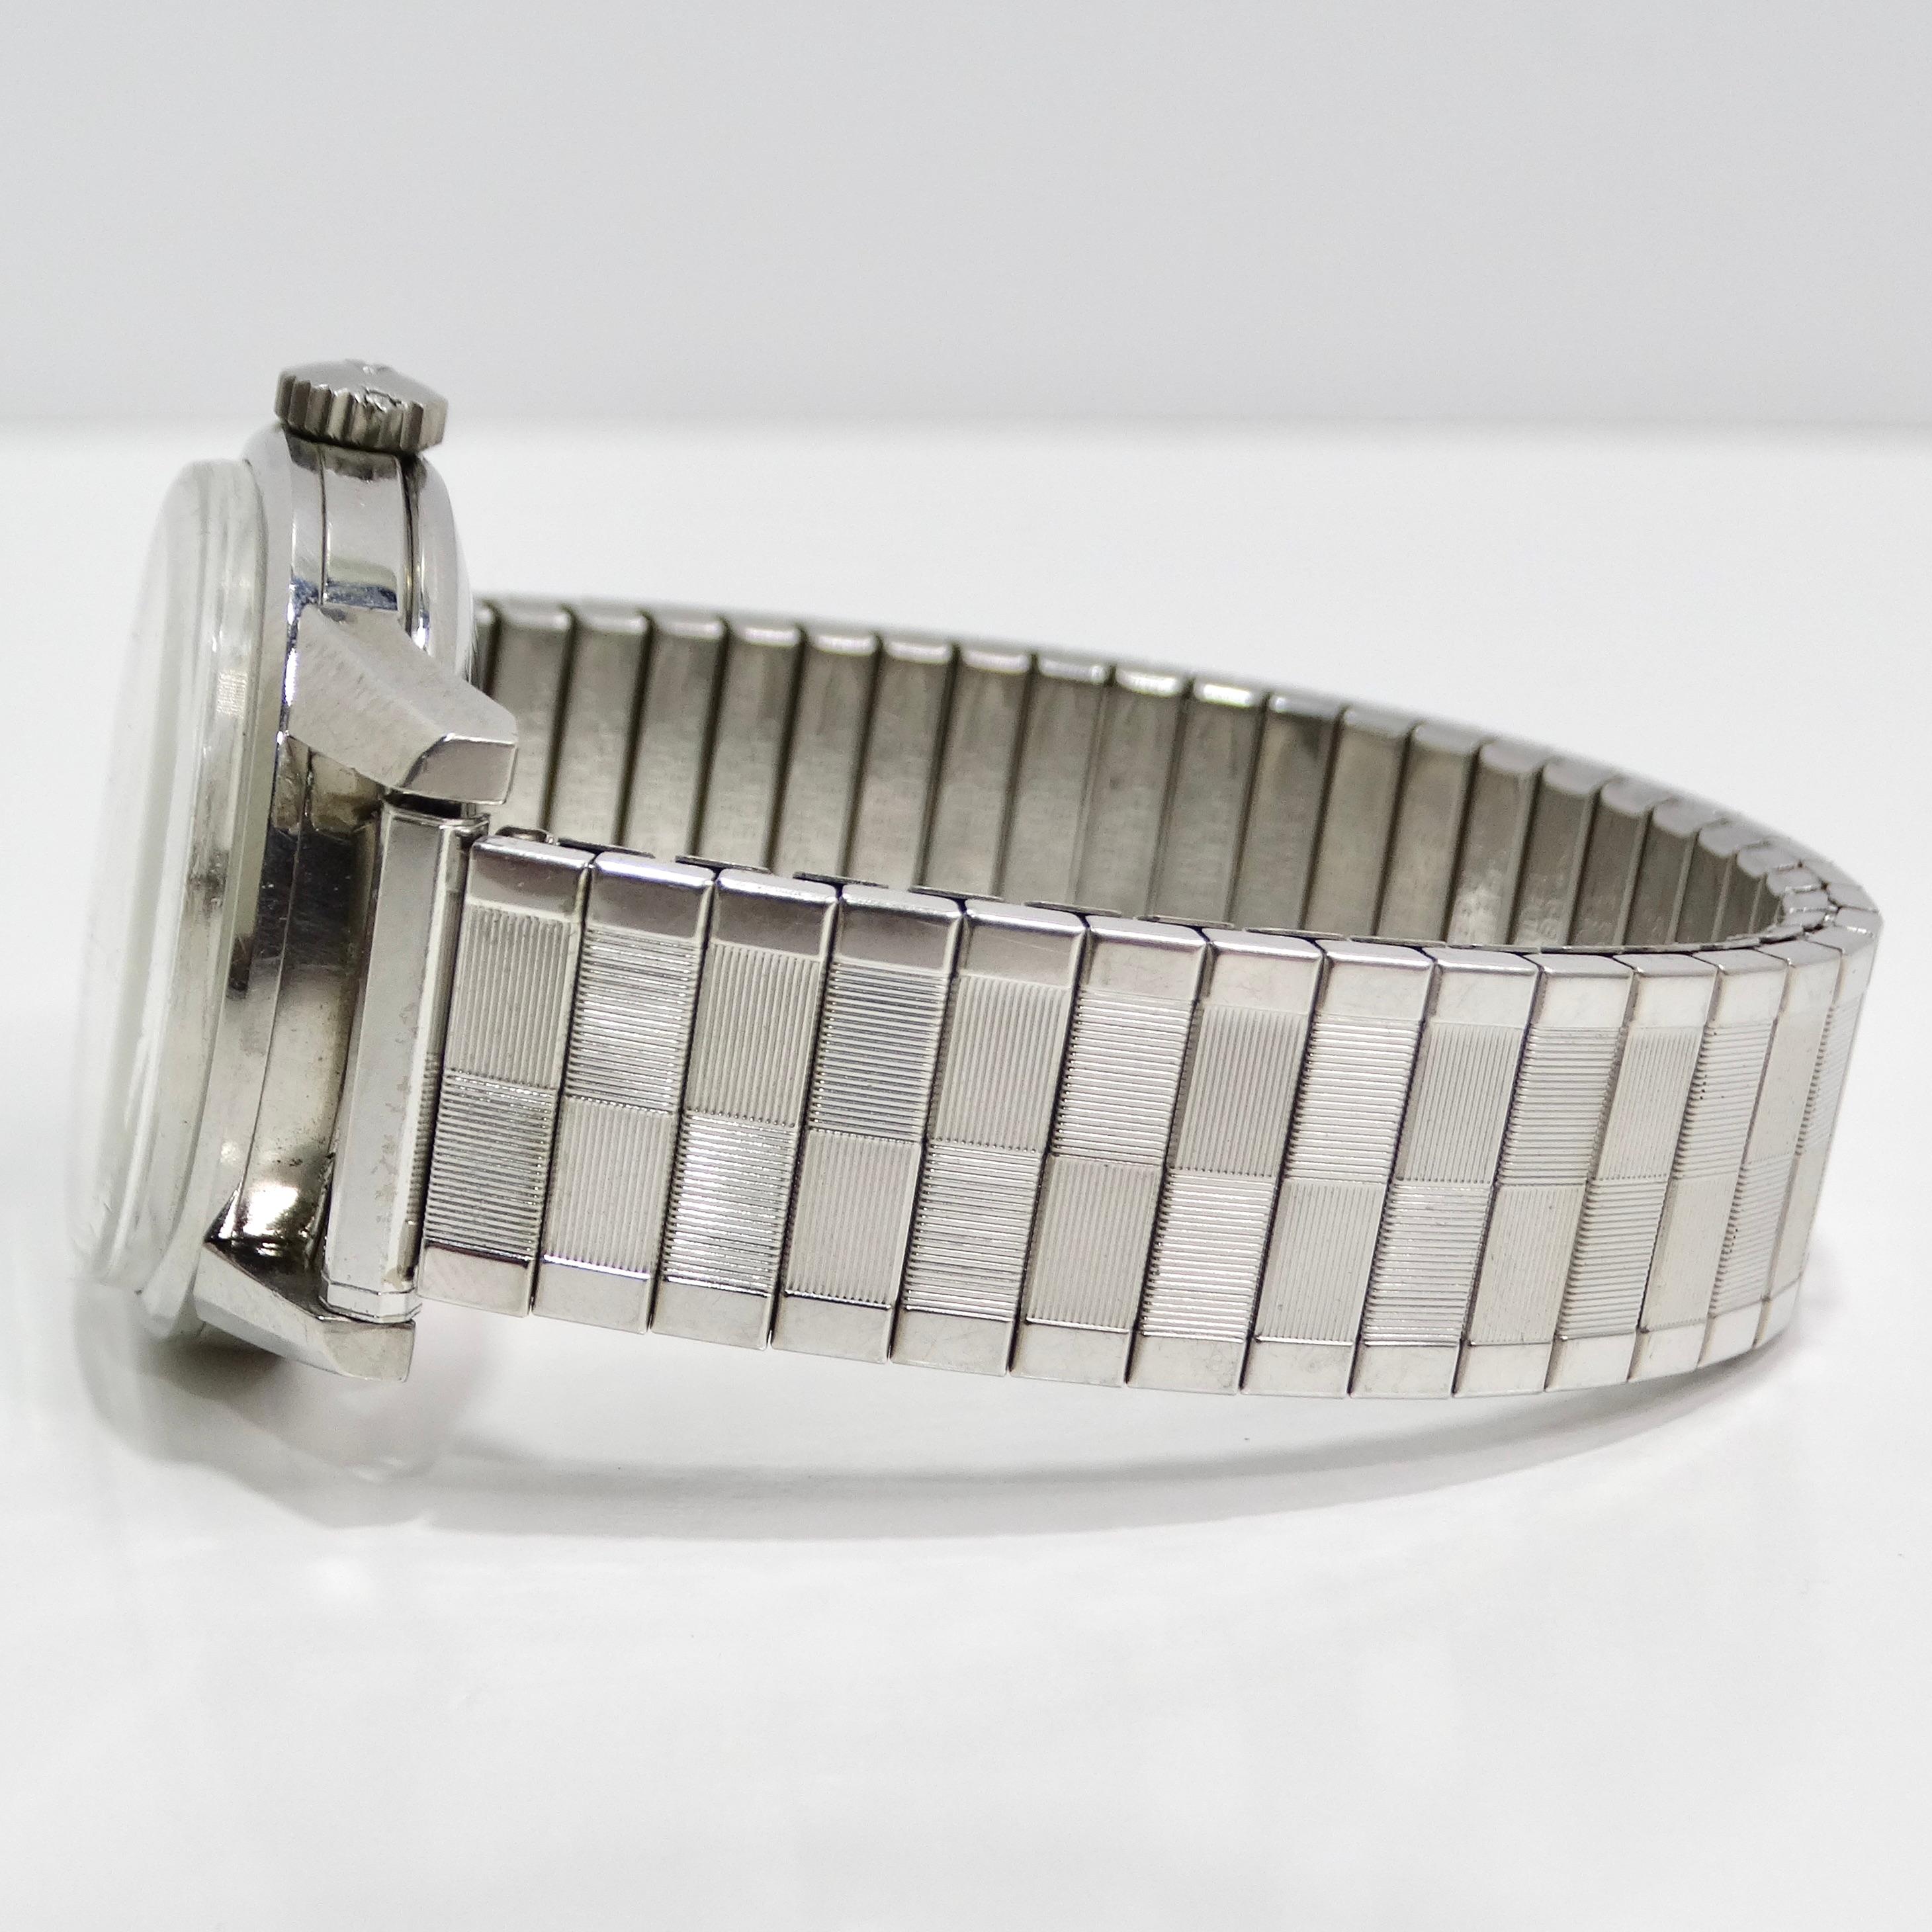 Vulcain 1960s Stainless Steel Watch For Sale 1